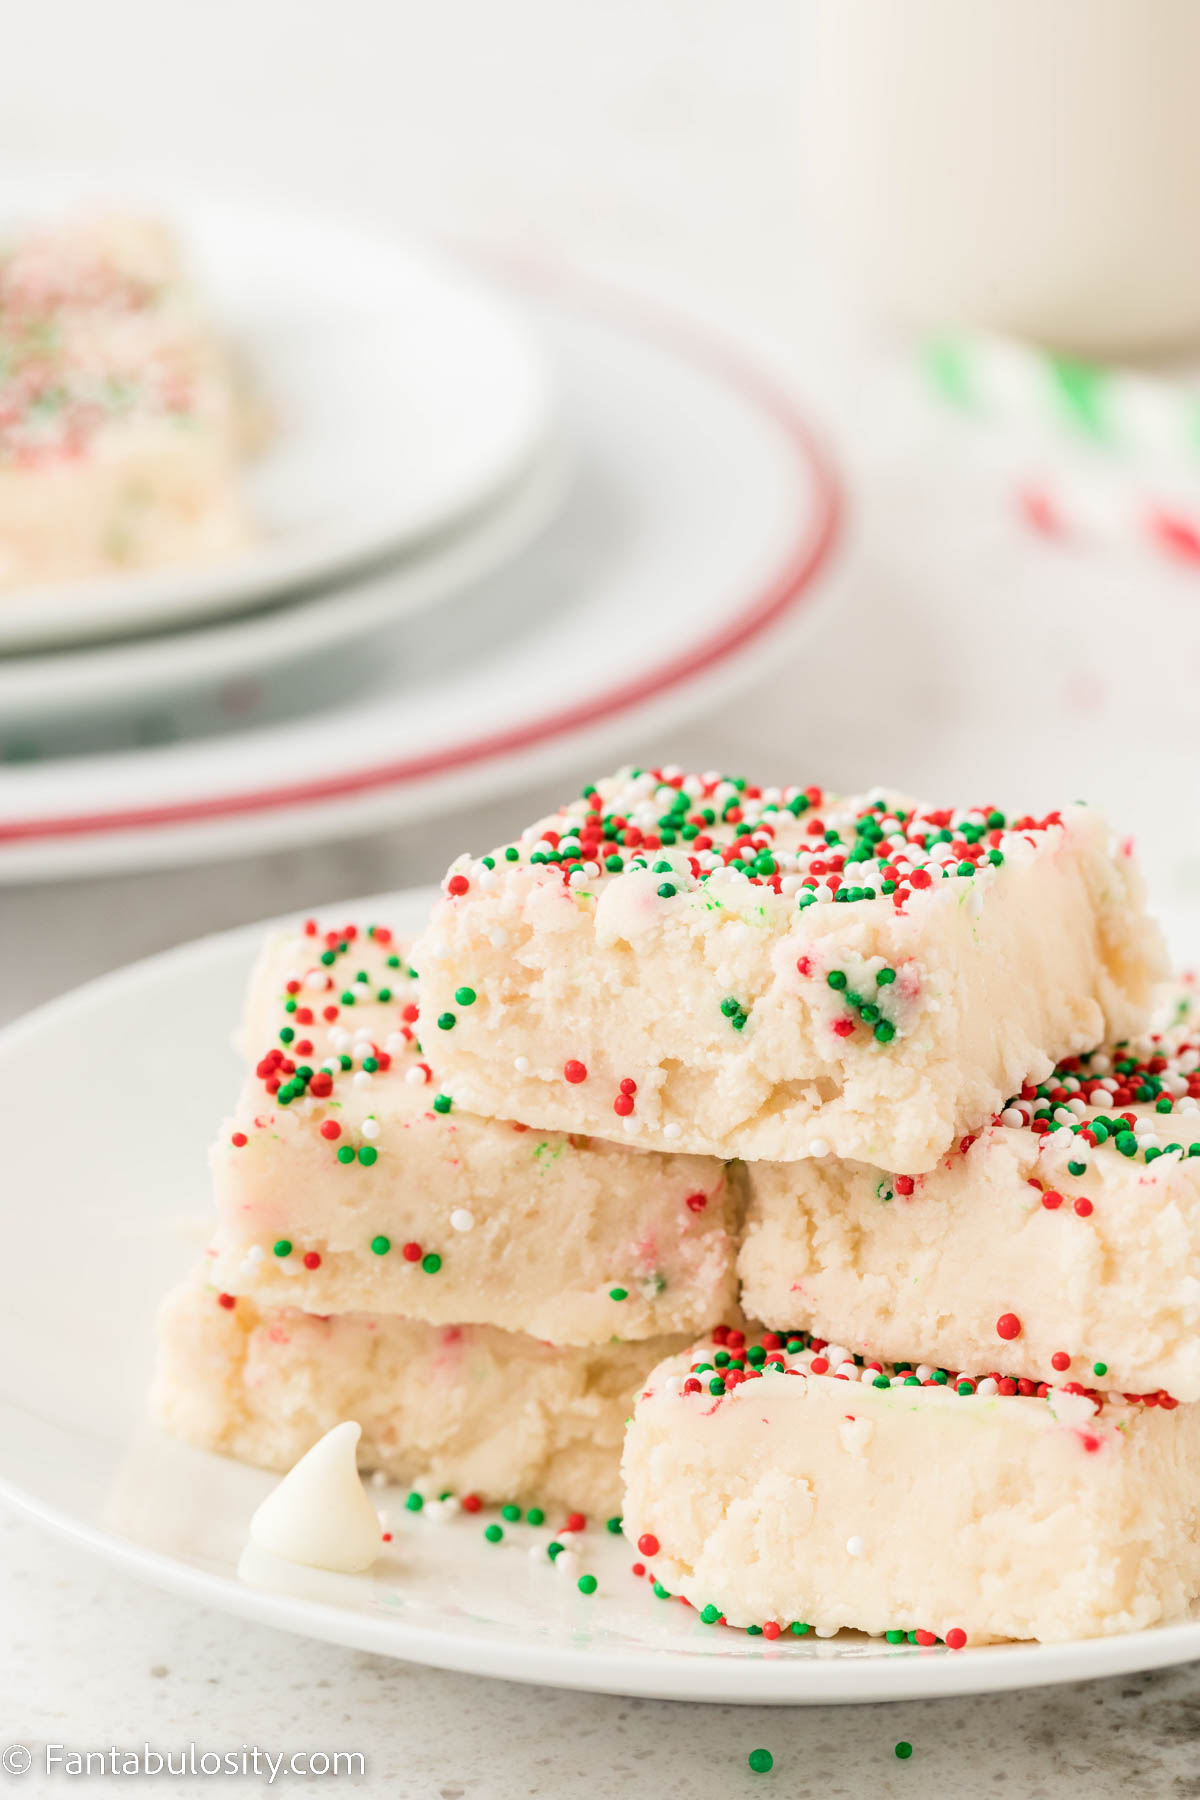 A white plate holding pieces of white fudge topped with red, white and green sprinkles is in the center of the photo